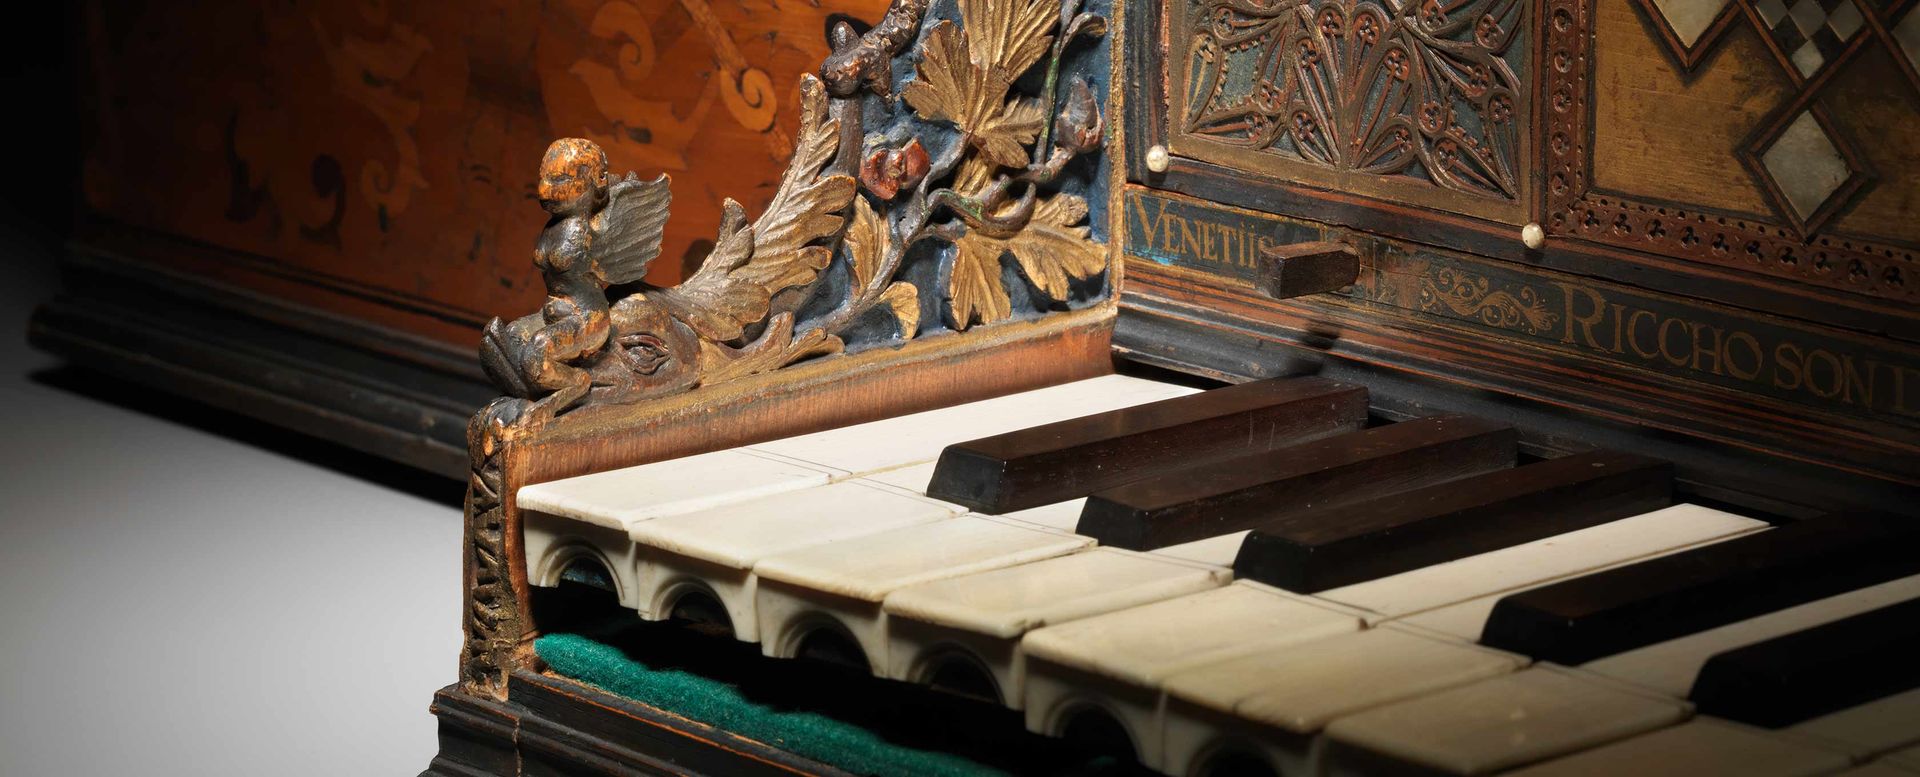 Detail view of a spinet keyboard